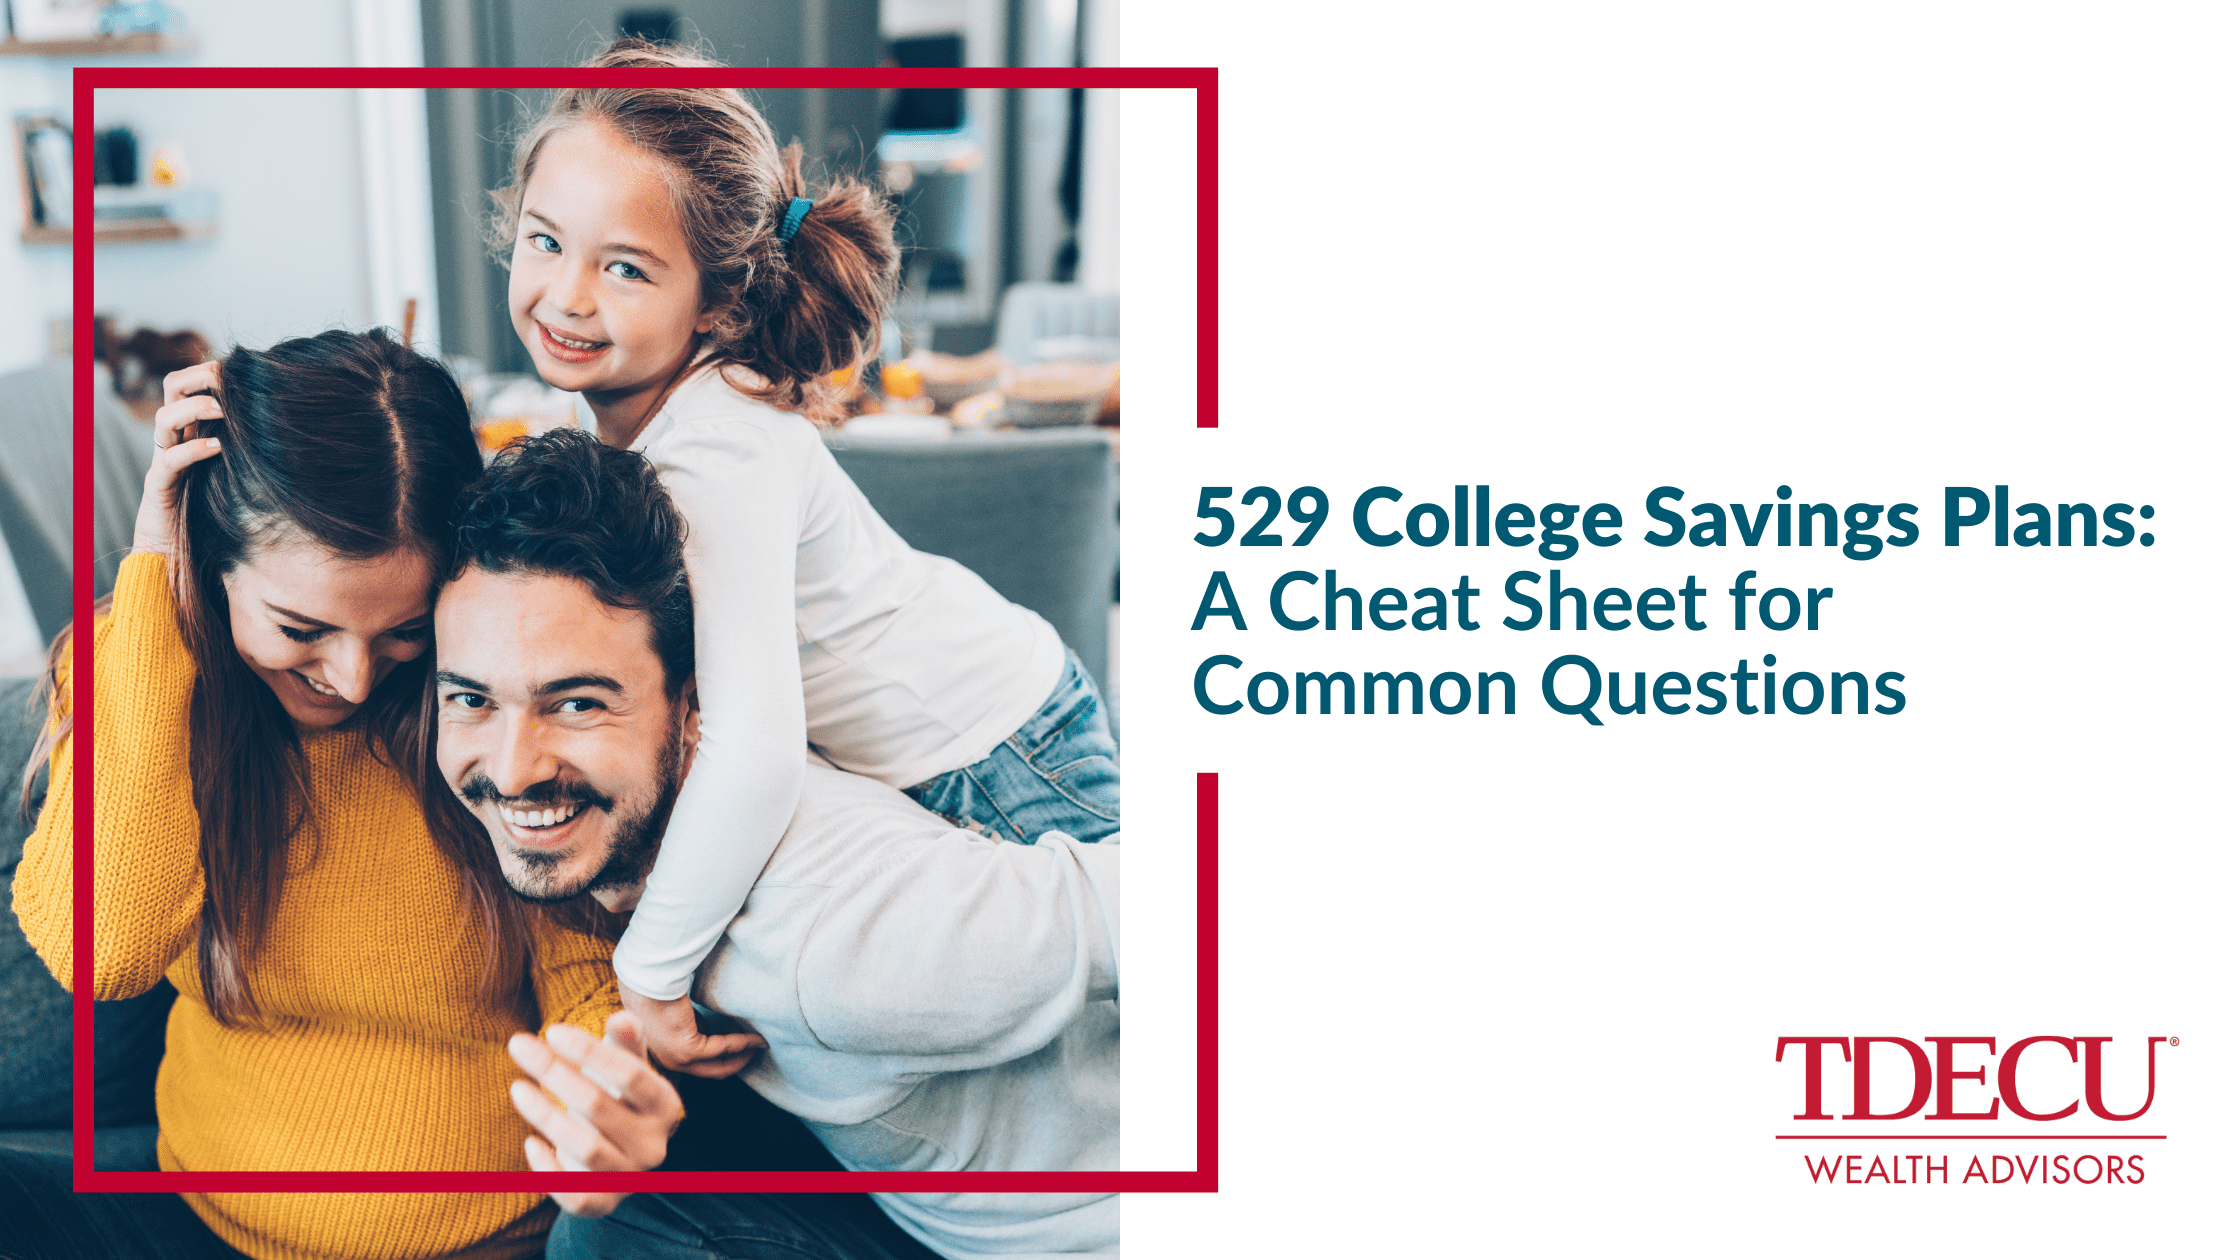 529 College Savings Plans: A Cheat Sheet for Common Questions